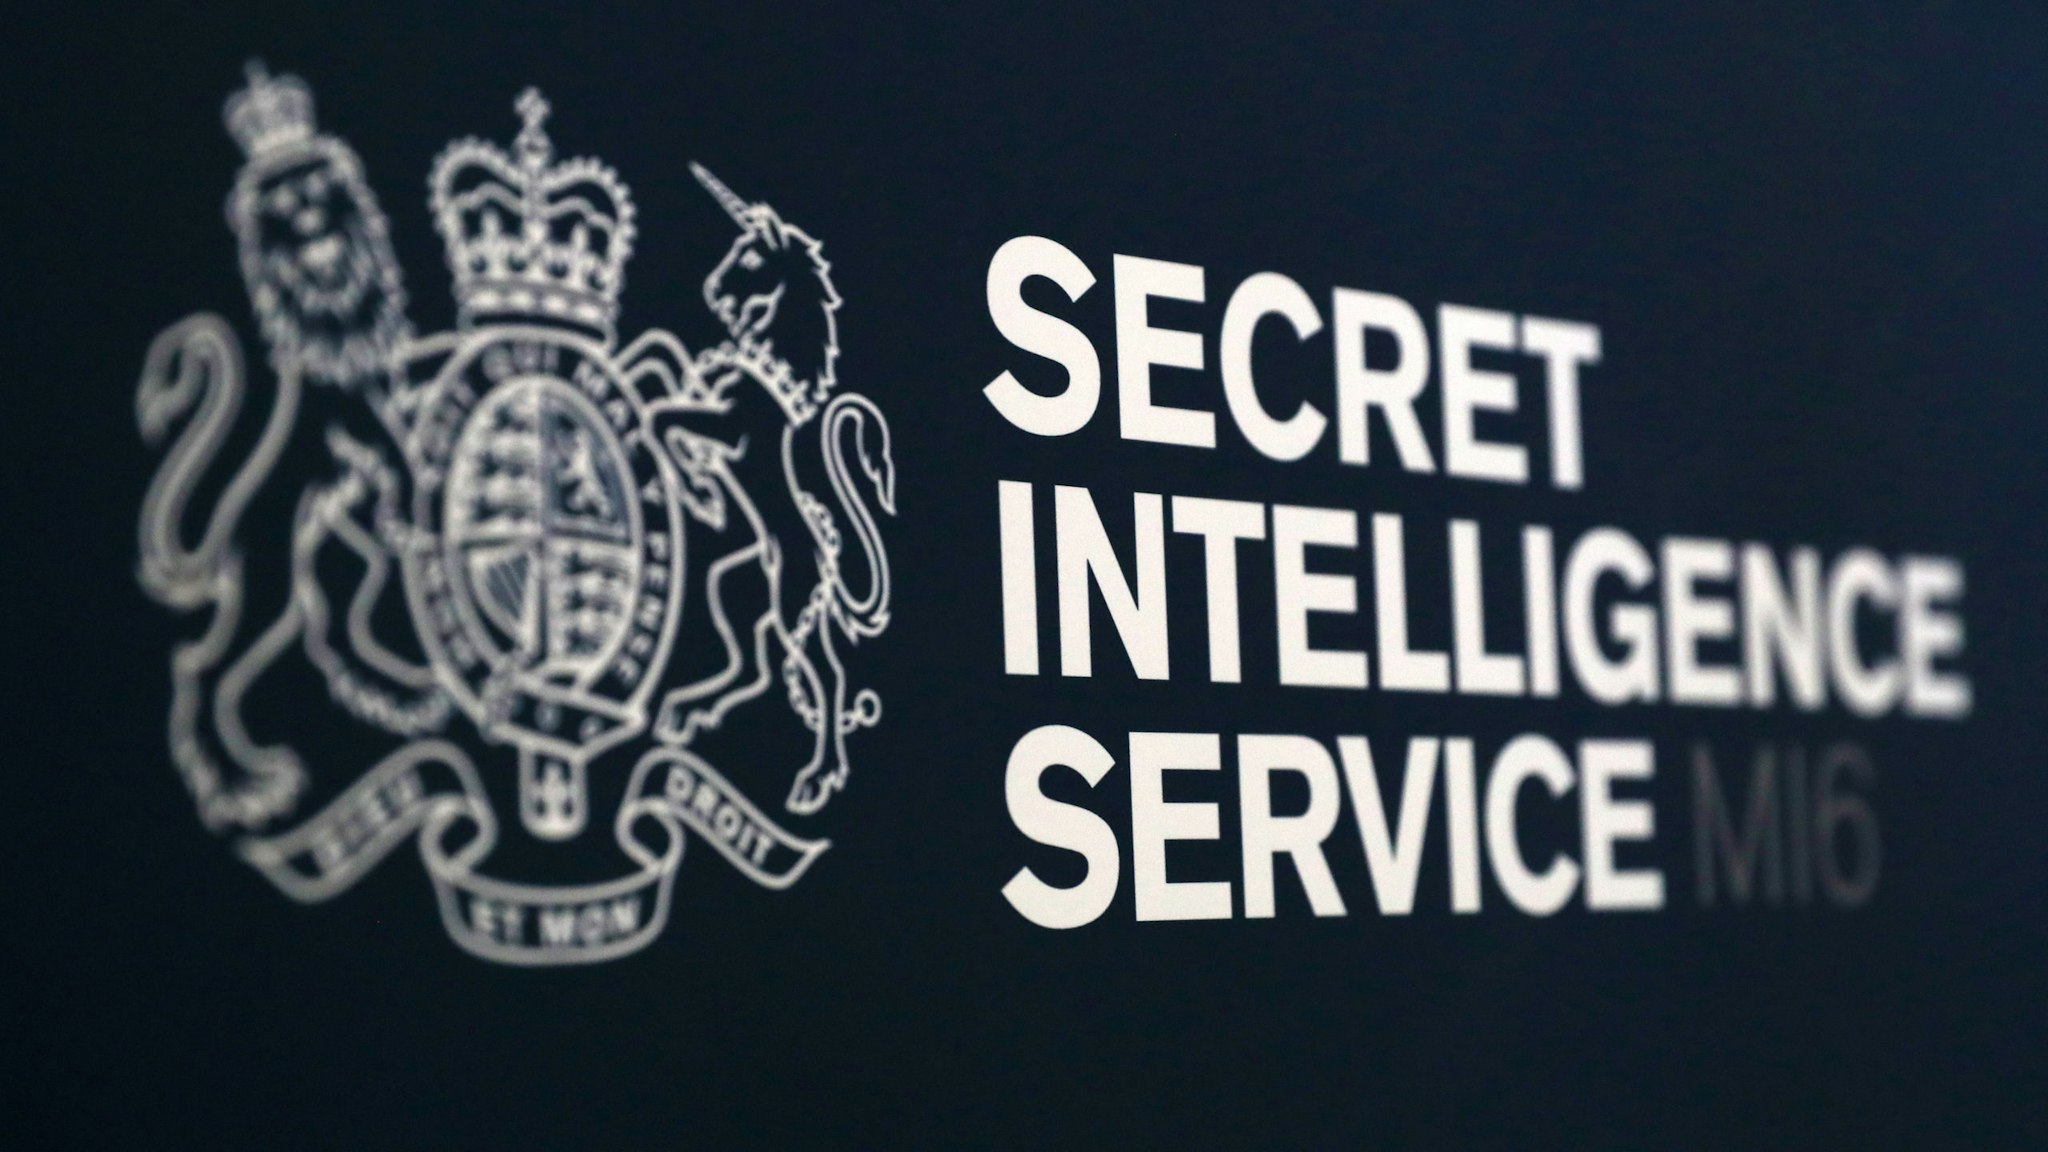 GLENROTHES, SCOTLAND - DECEMBER 03: A Secret Intelligence Service sign at the entrance to Buchanan Theatre ahead of a speech by Alex Younger, Chief of the Secret Intelligence Service - known as MI6 at University of St Andrews on December 3, 2018 in Glenrothes, Scotland.